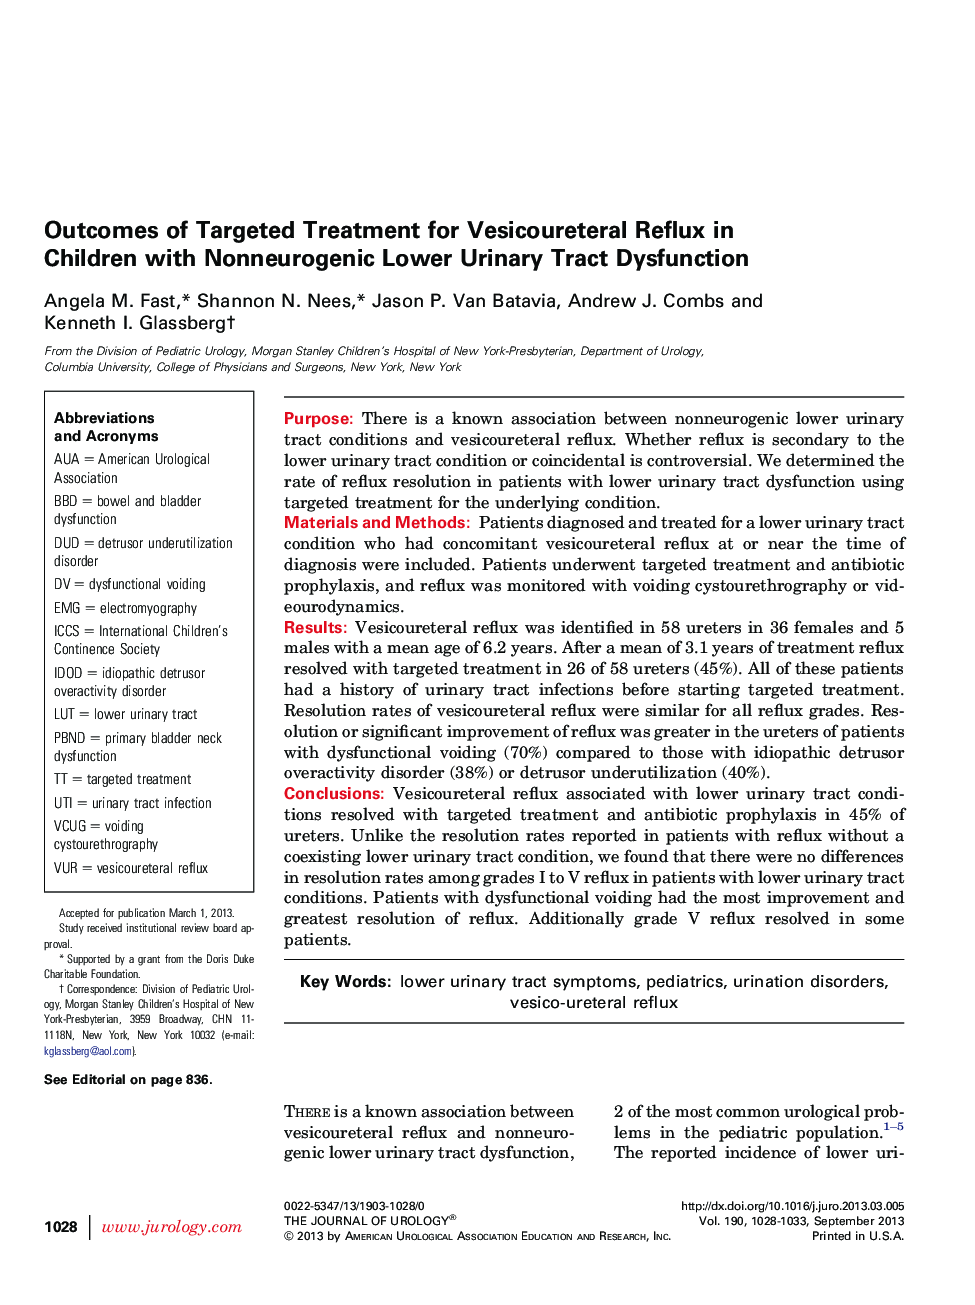 Outcomes of Targeted Treatment for Vesicoureteral Reflux in Children with Nonneurogenic Lower Urinary Tract Dysfunction 